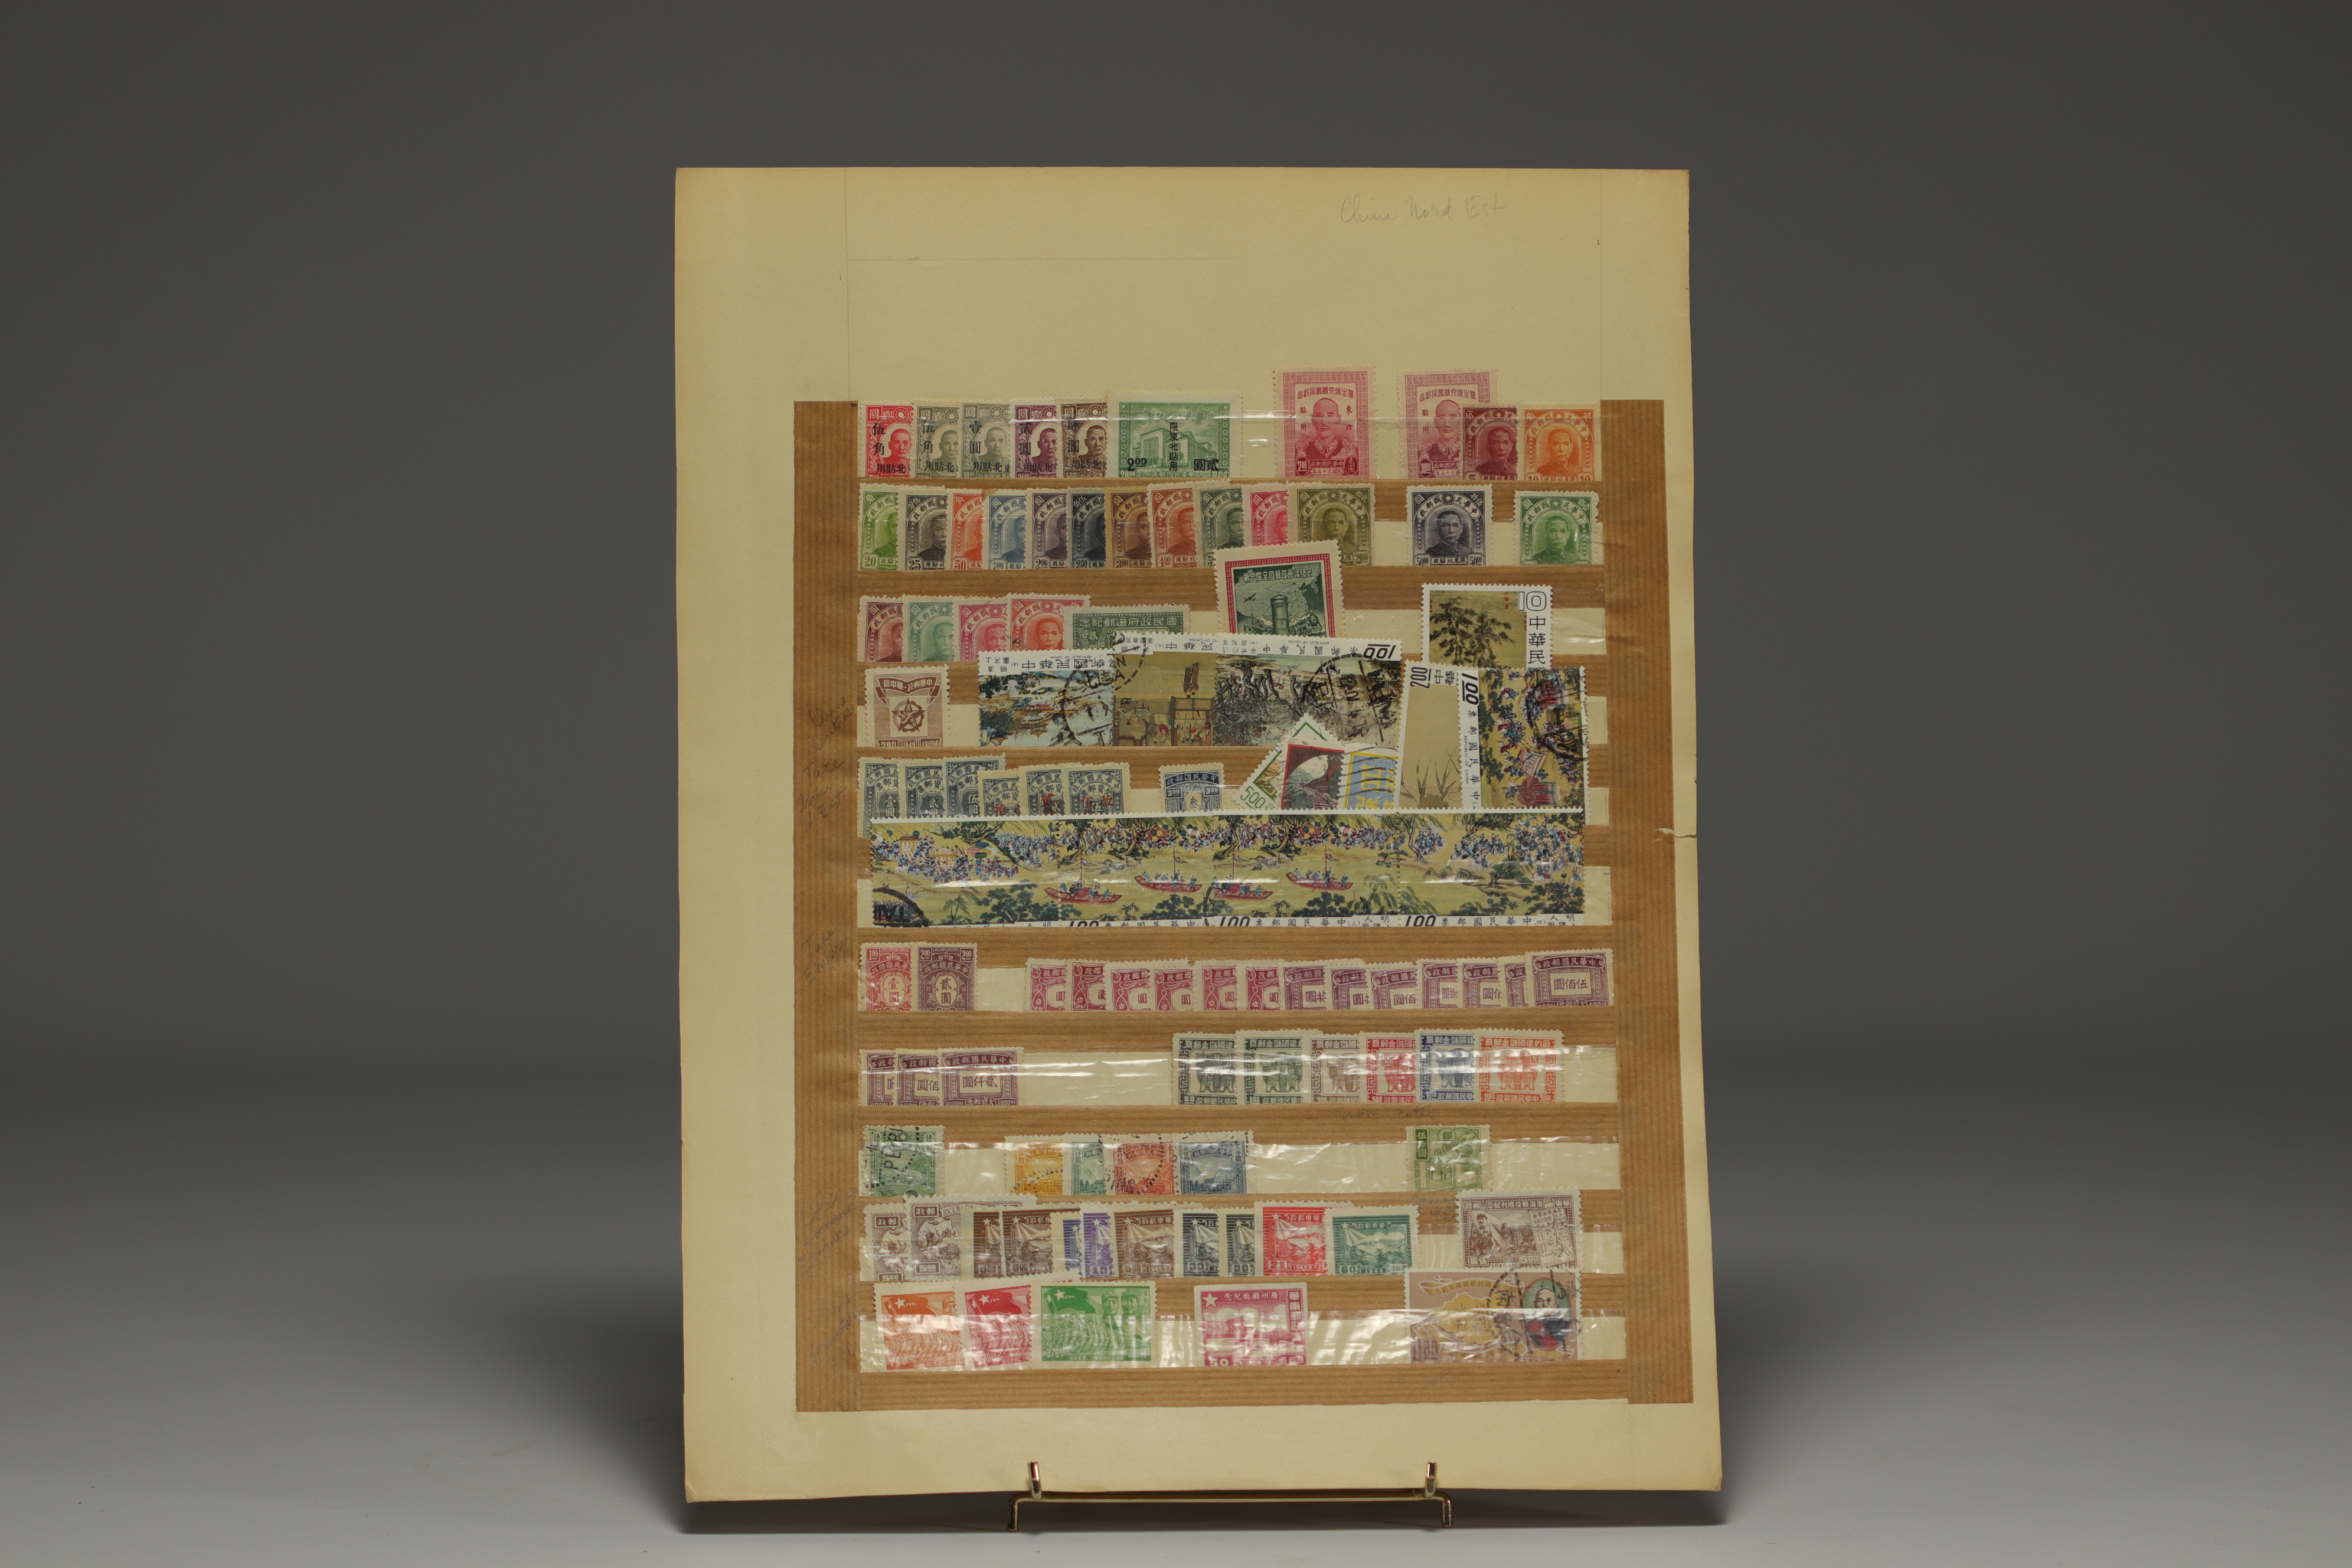 Set of 30 albums of world stamps, China, Japan, Middle East, Europe, etc. (Lot 2) - Image 11 of 22